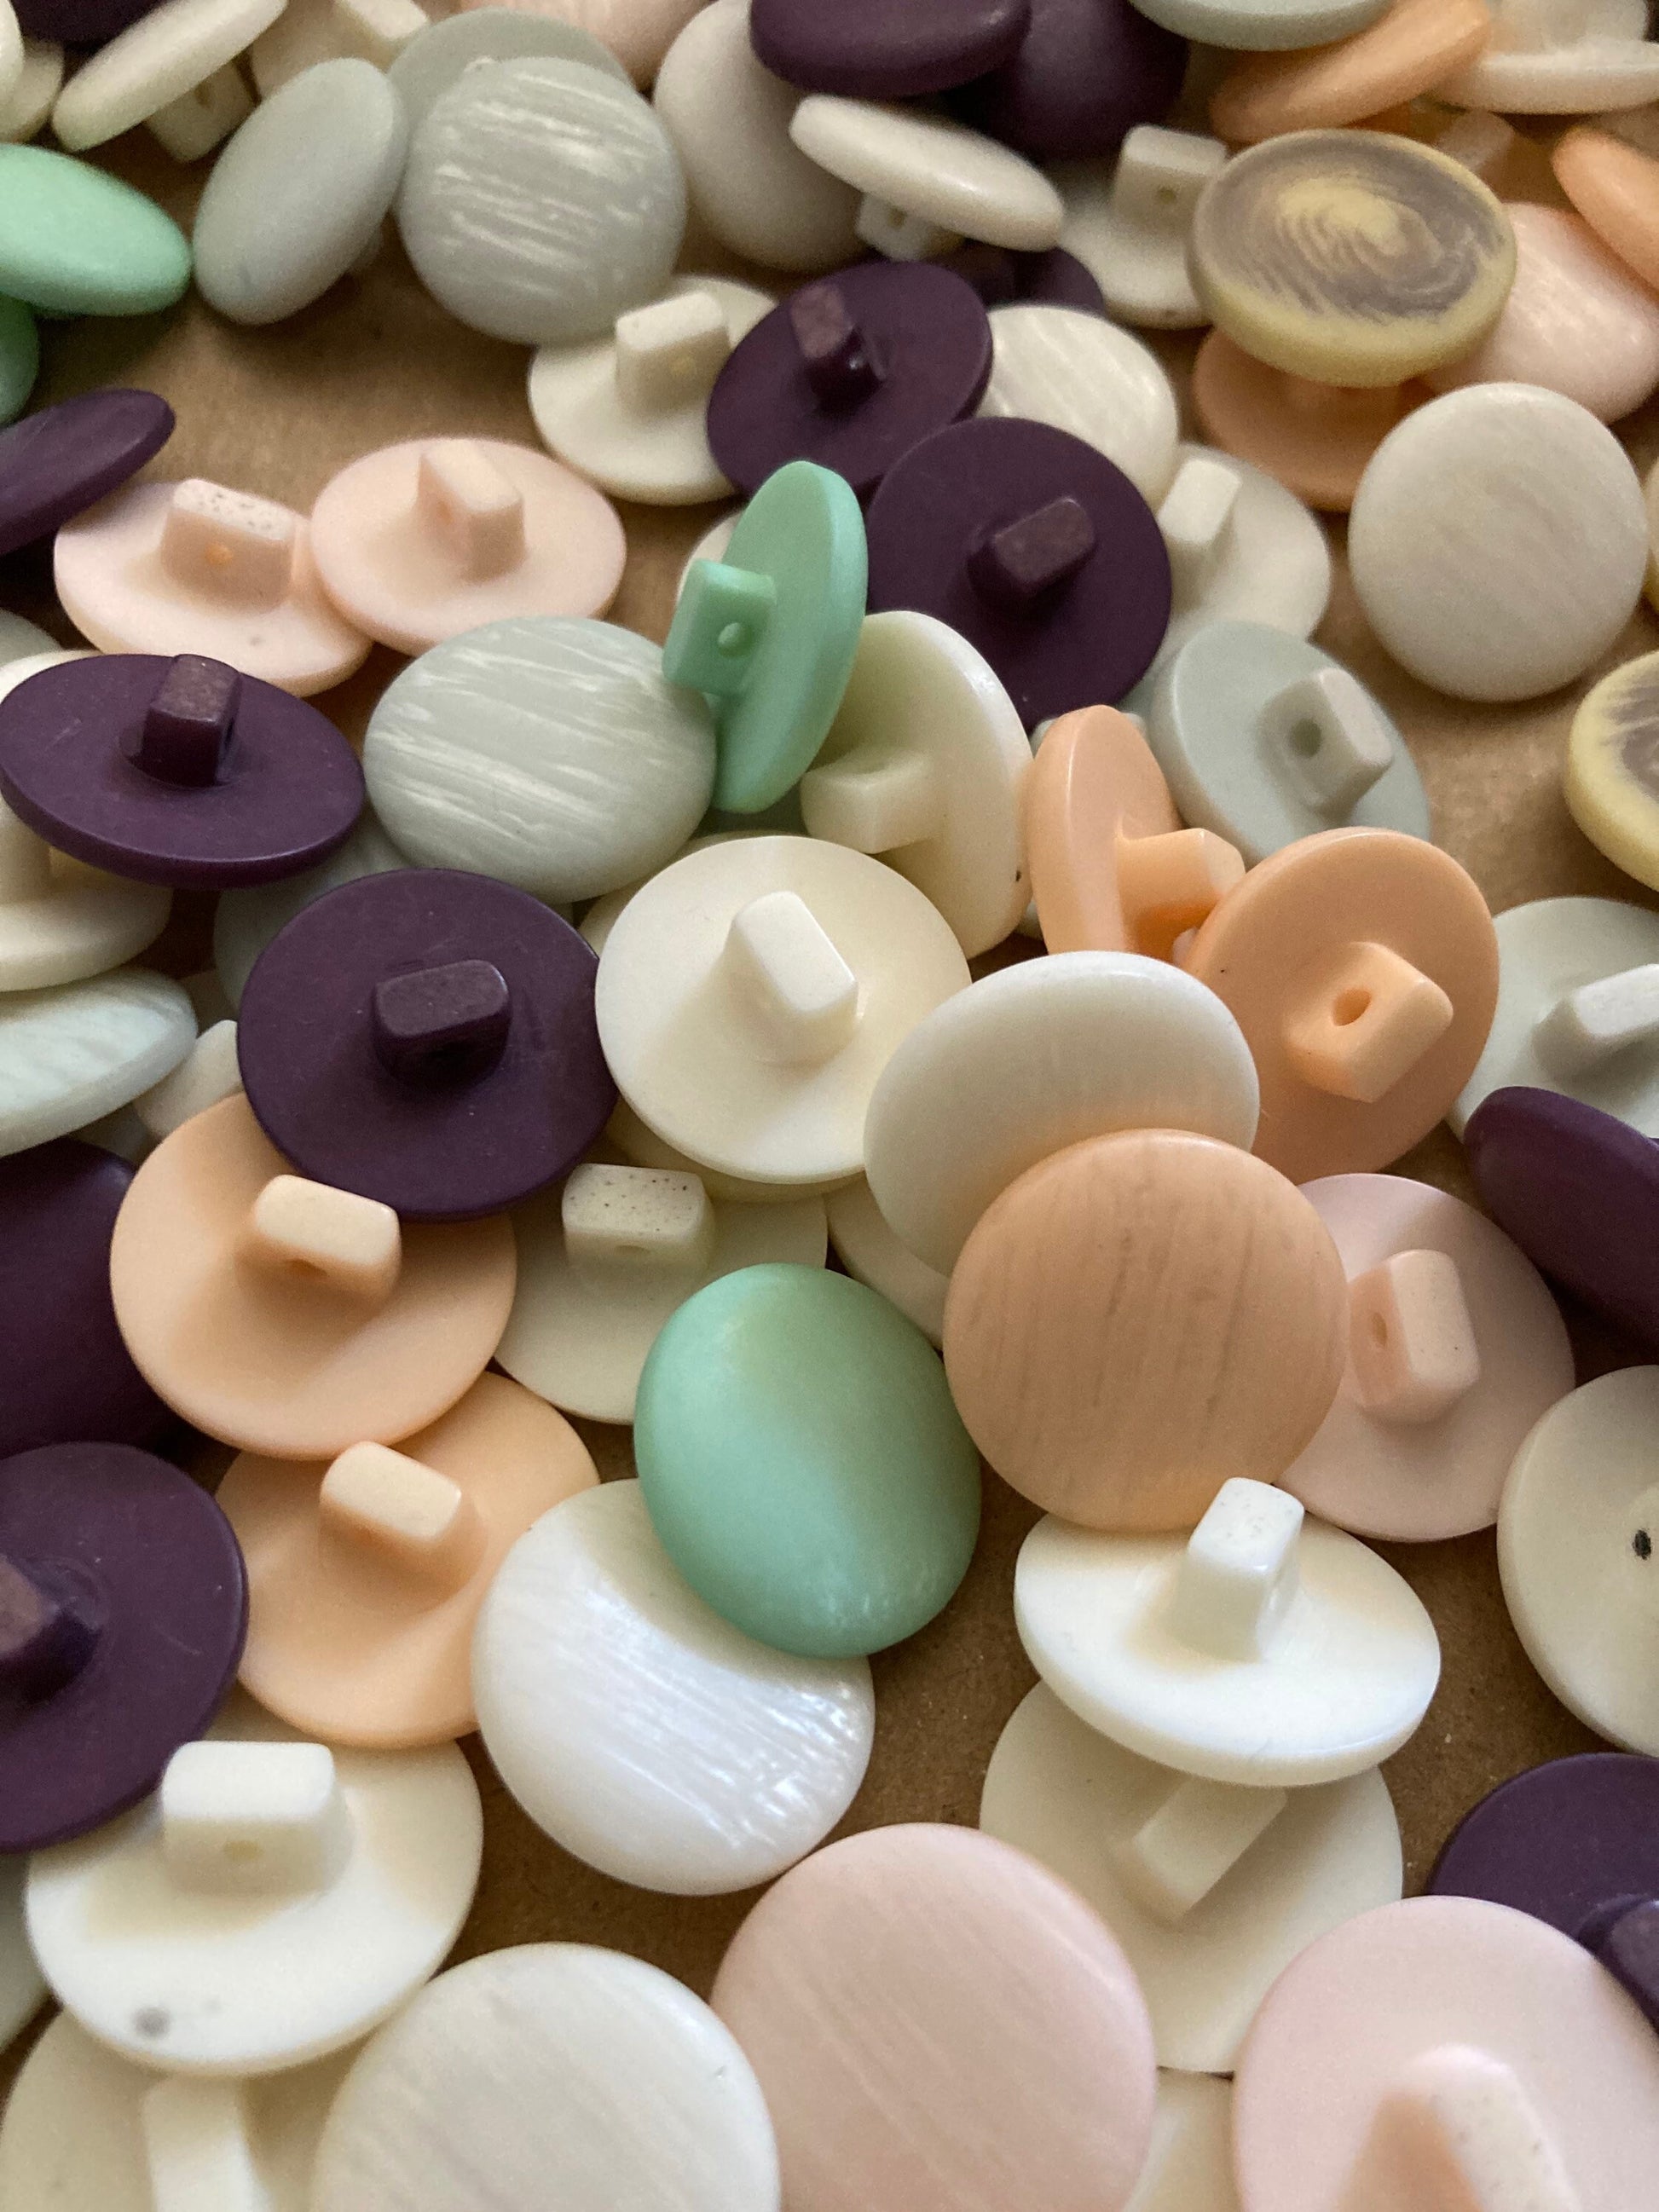 Job lot 18mm plastic buttons in cream violet and purple mint green pink 181 gms